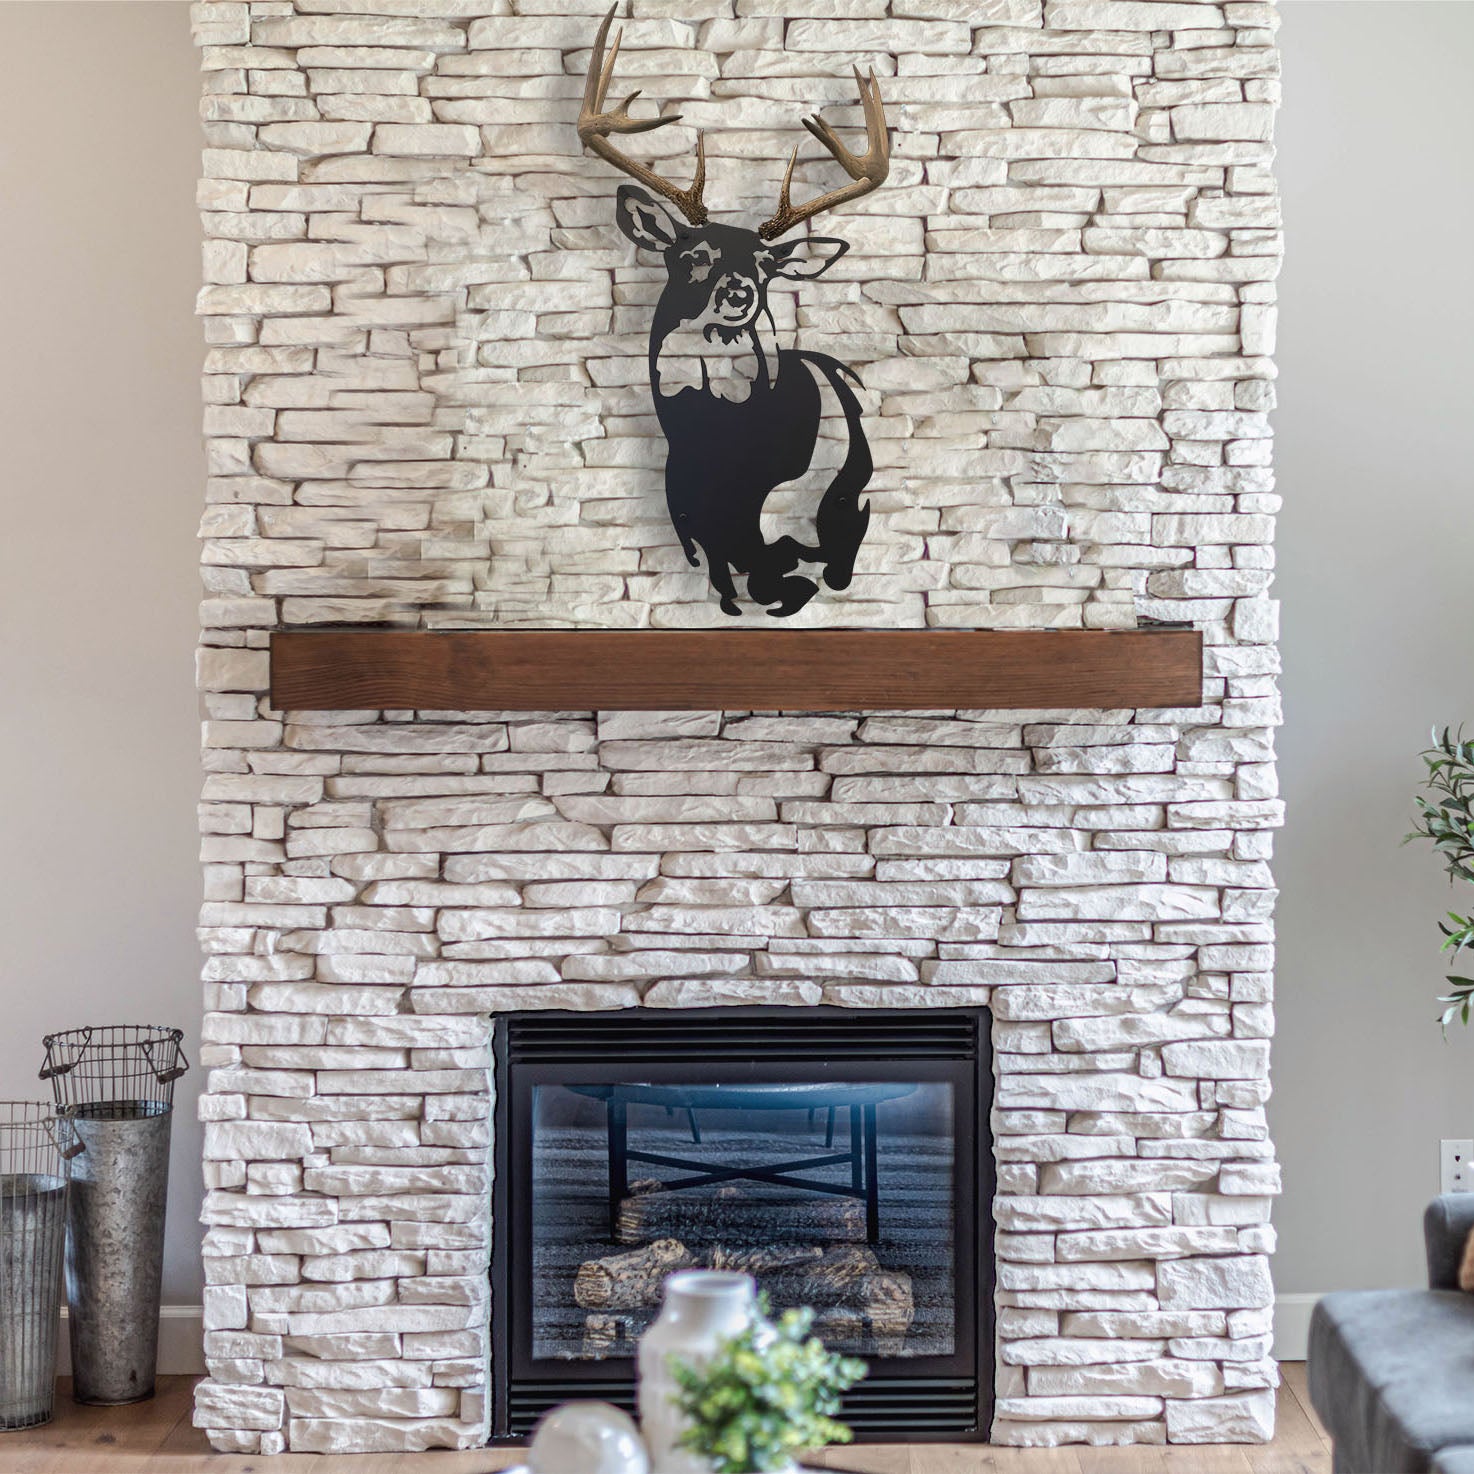 A banner image featuring an anlter & metal wall decor by Dekor Nature above a fireplace